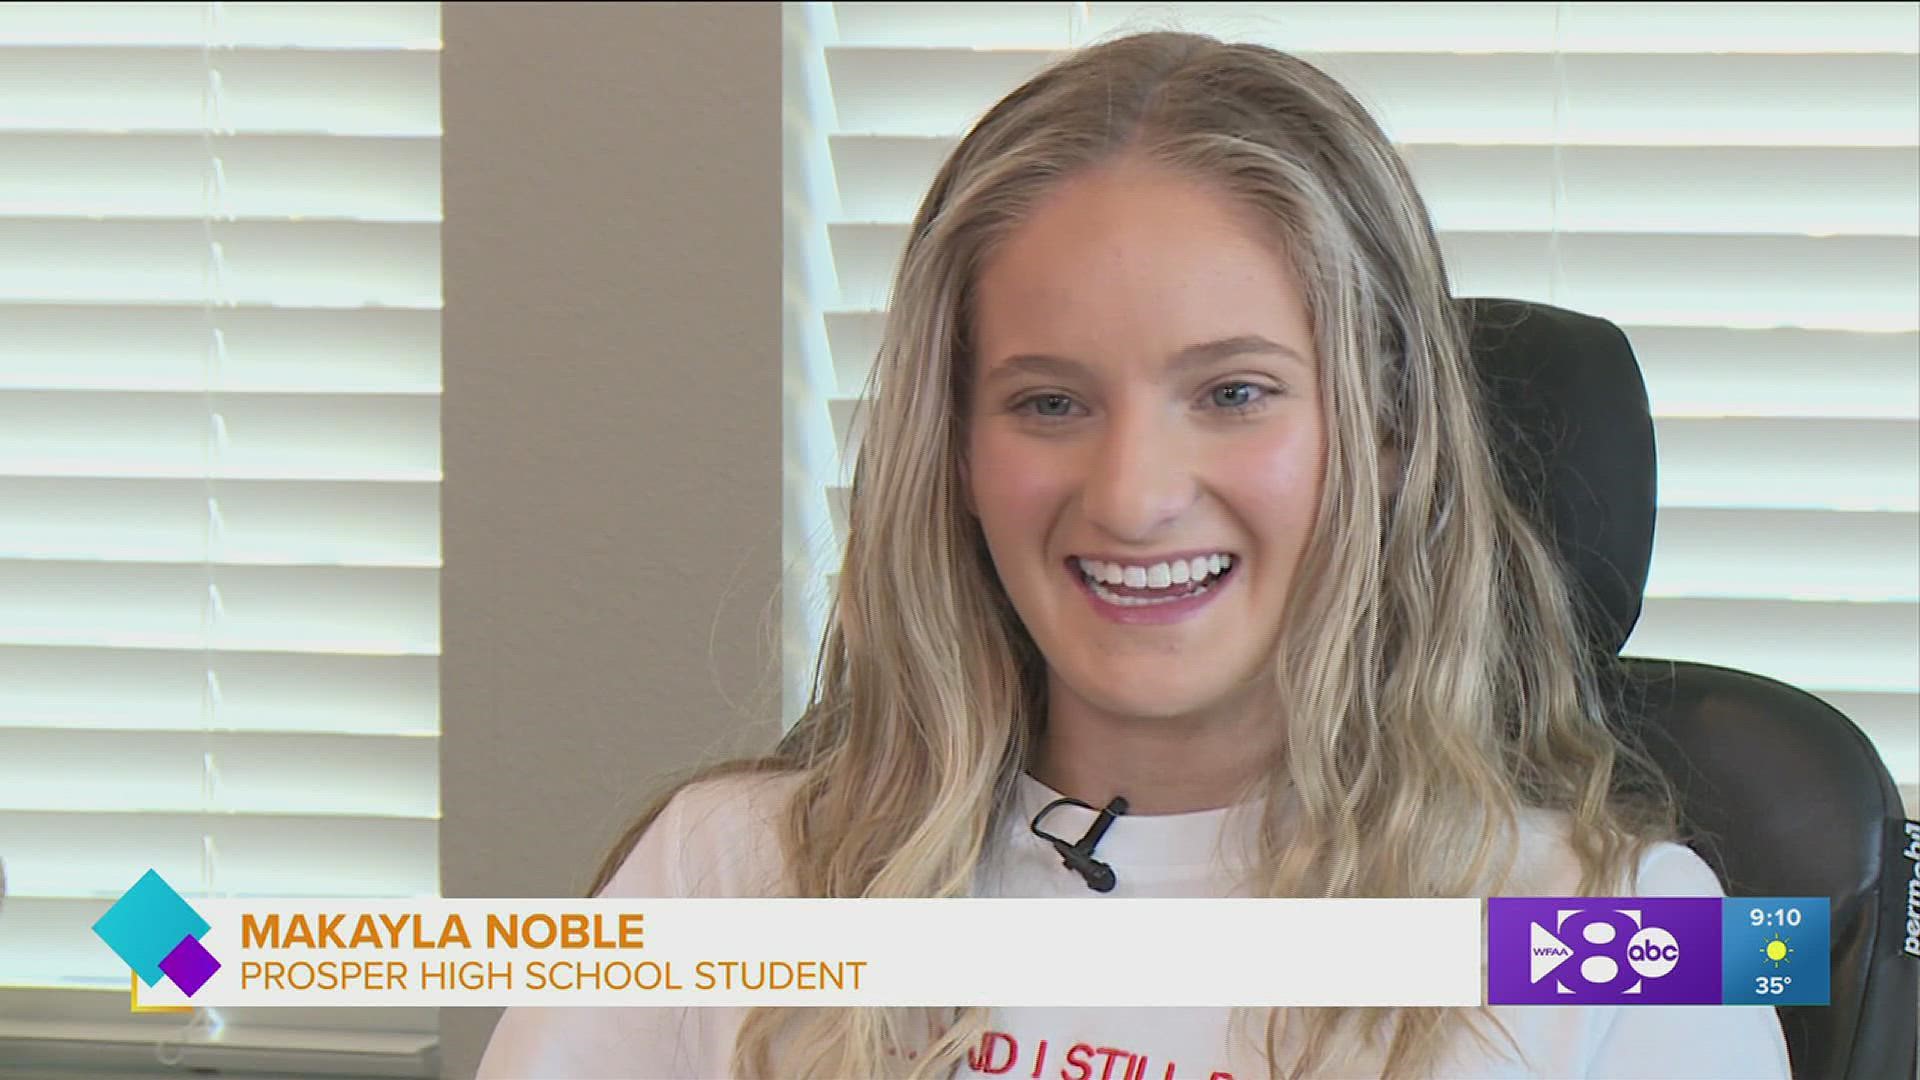 Meet Makayla Noble - a cheerleader in Prosper who was paralyzed in an accident, and has since defied the odds, while inspiring people along the way.